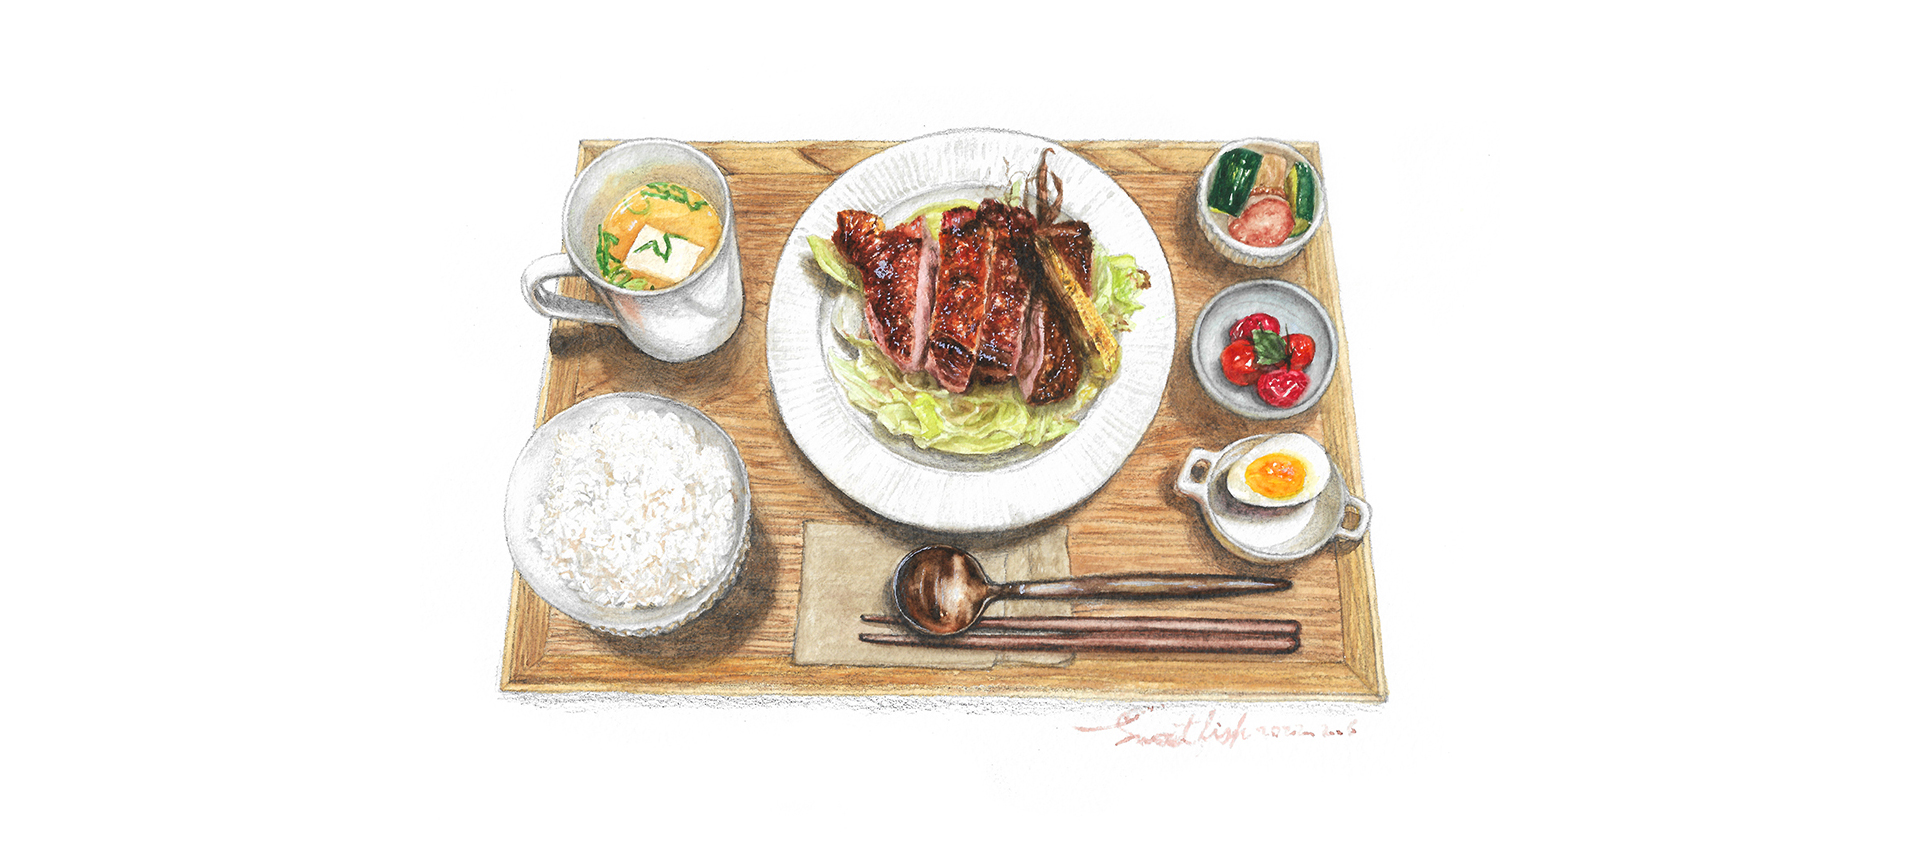 baked-chicken-thigh-meal-set-watercolor-food-illustration-by-sweetfish-food-art